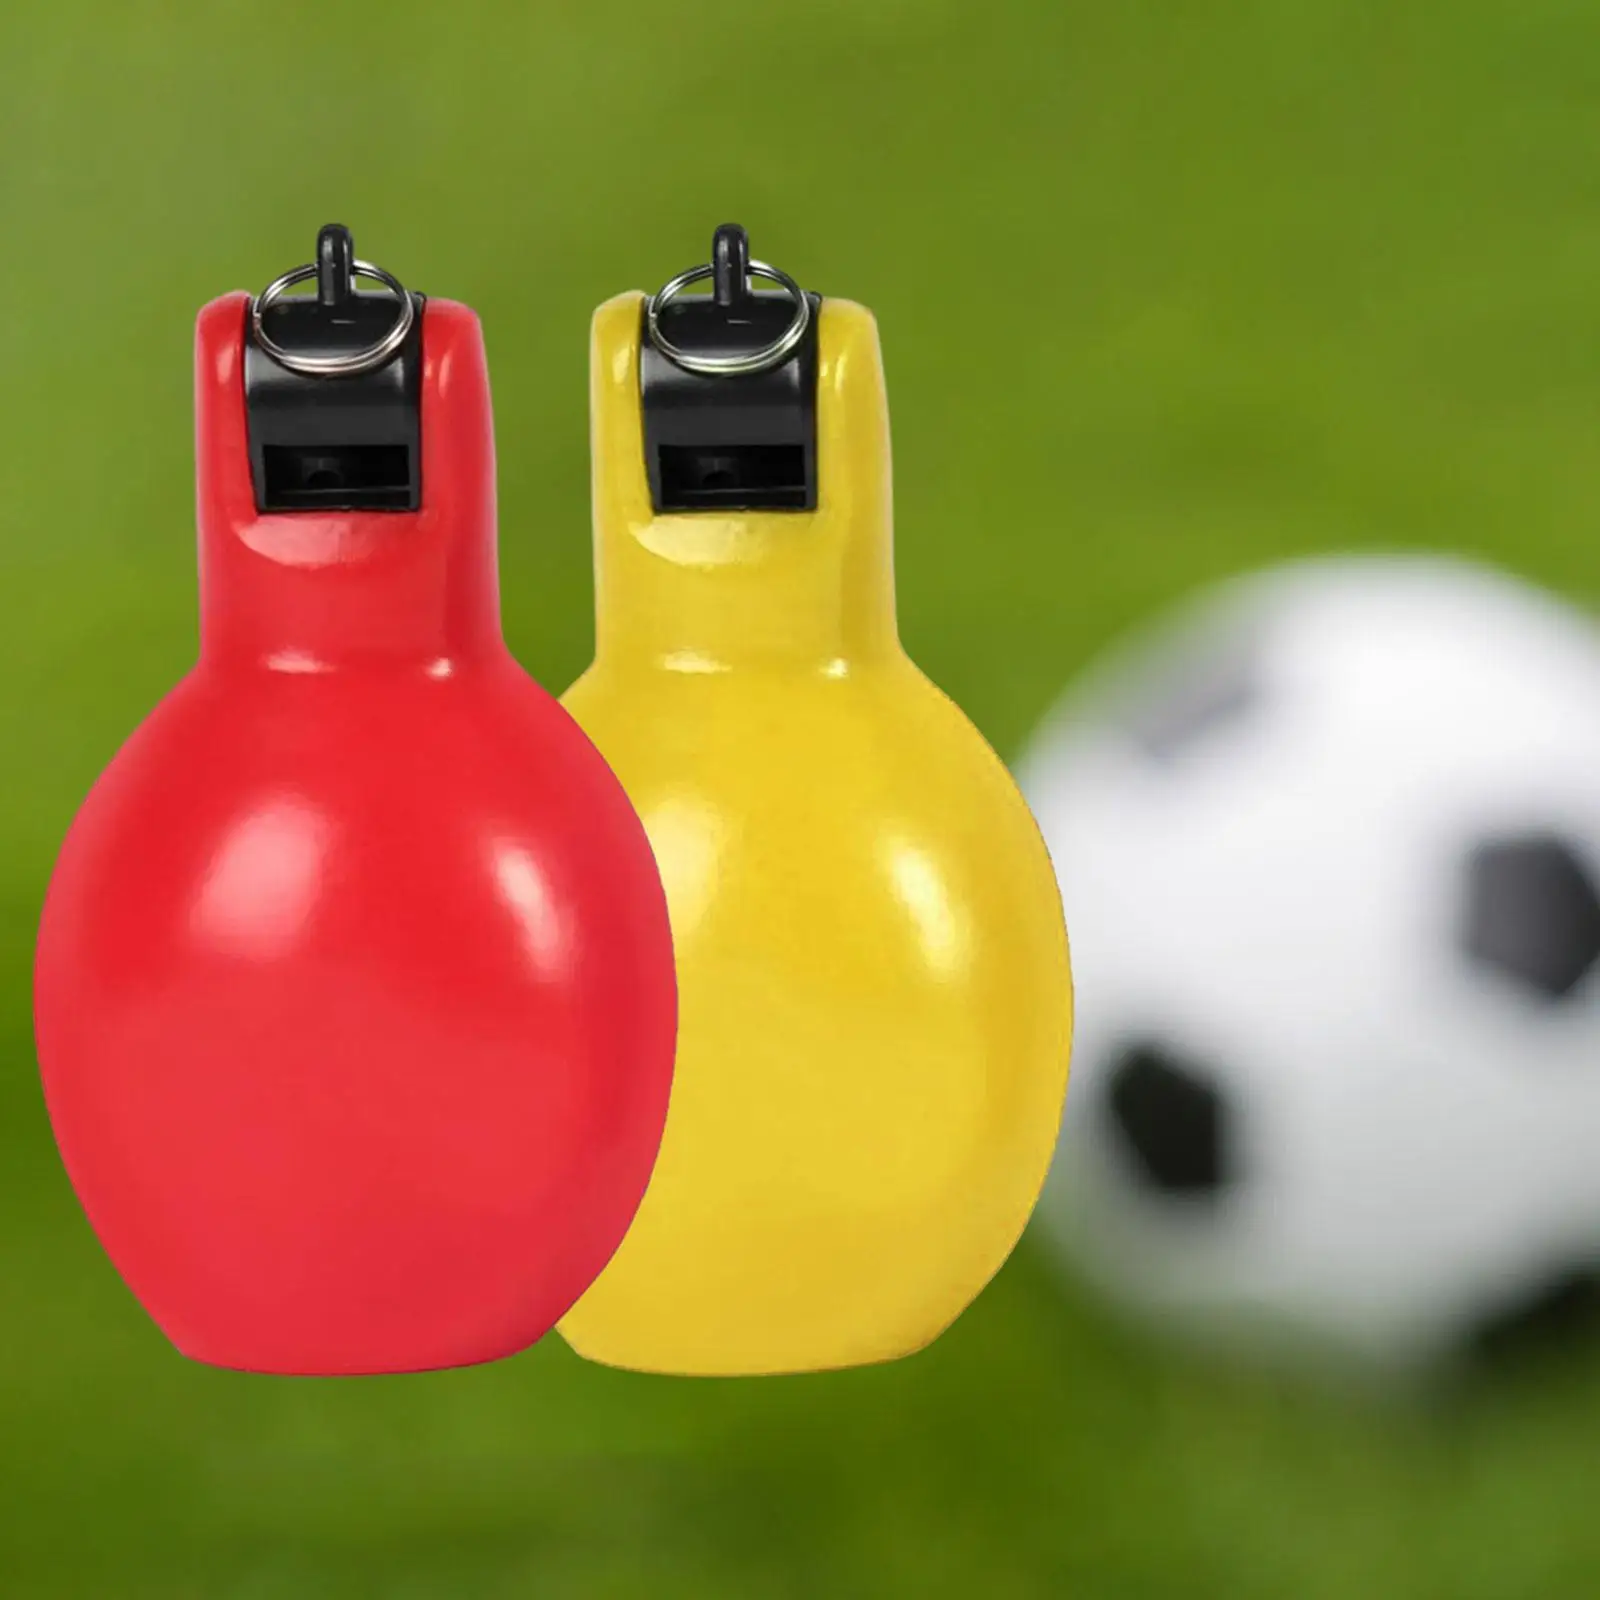 2Pcs Hand Squeeze Whistles, Coaches Sports Whistle, Trainer Whistle for Hiking Home School Football Coaches Referees